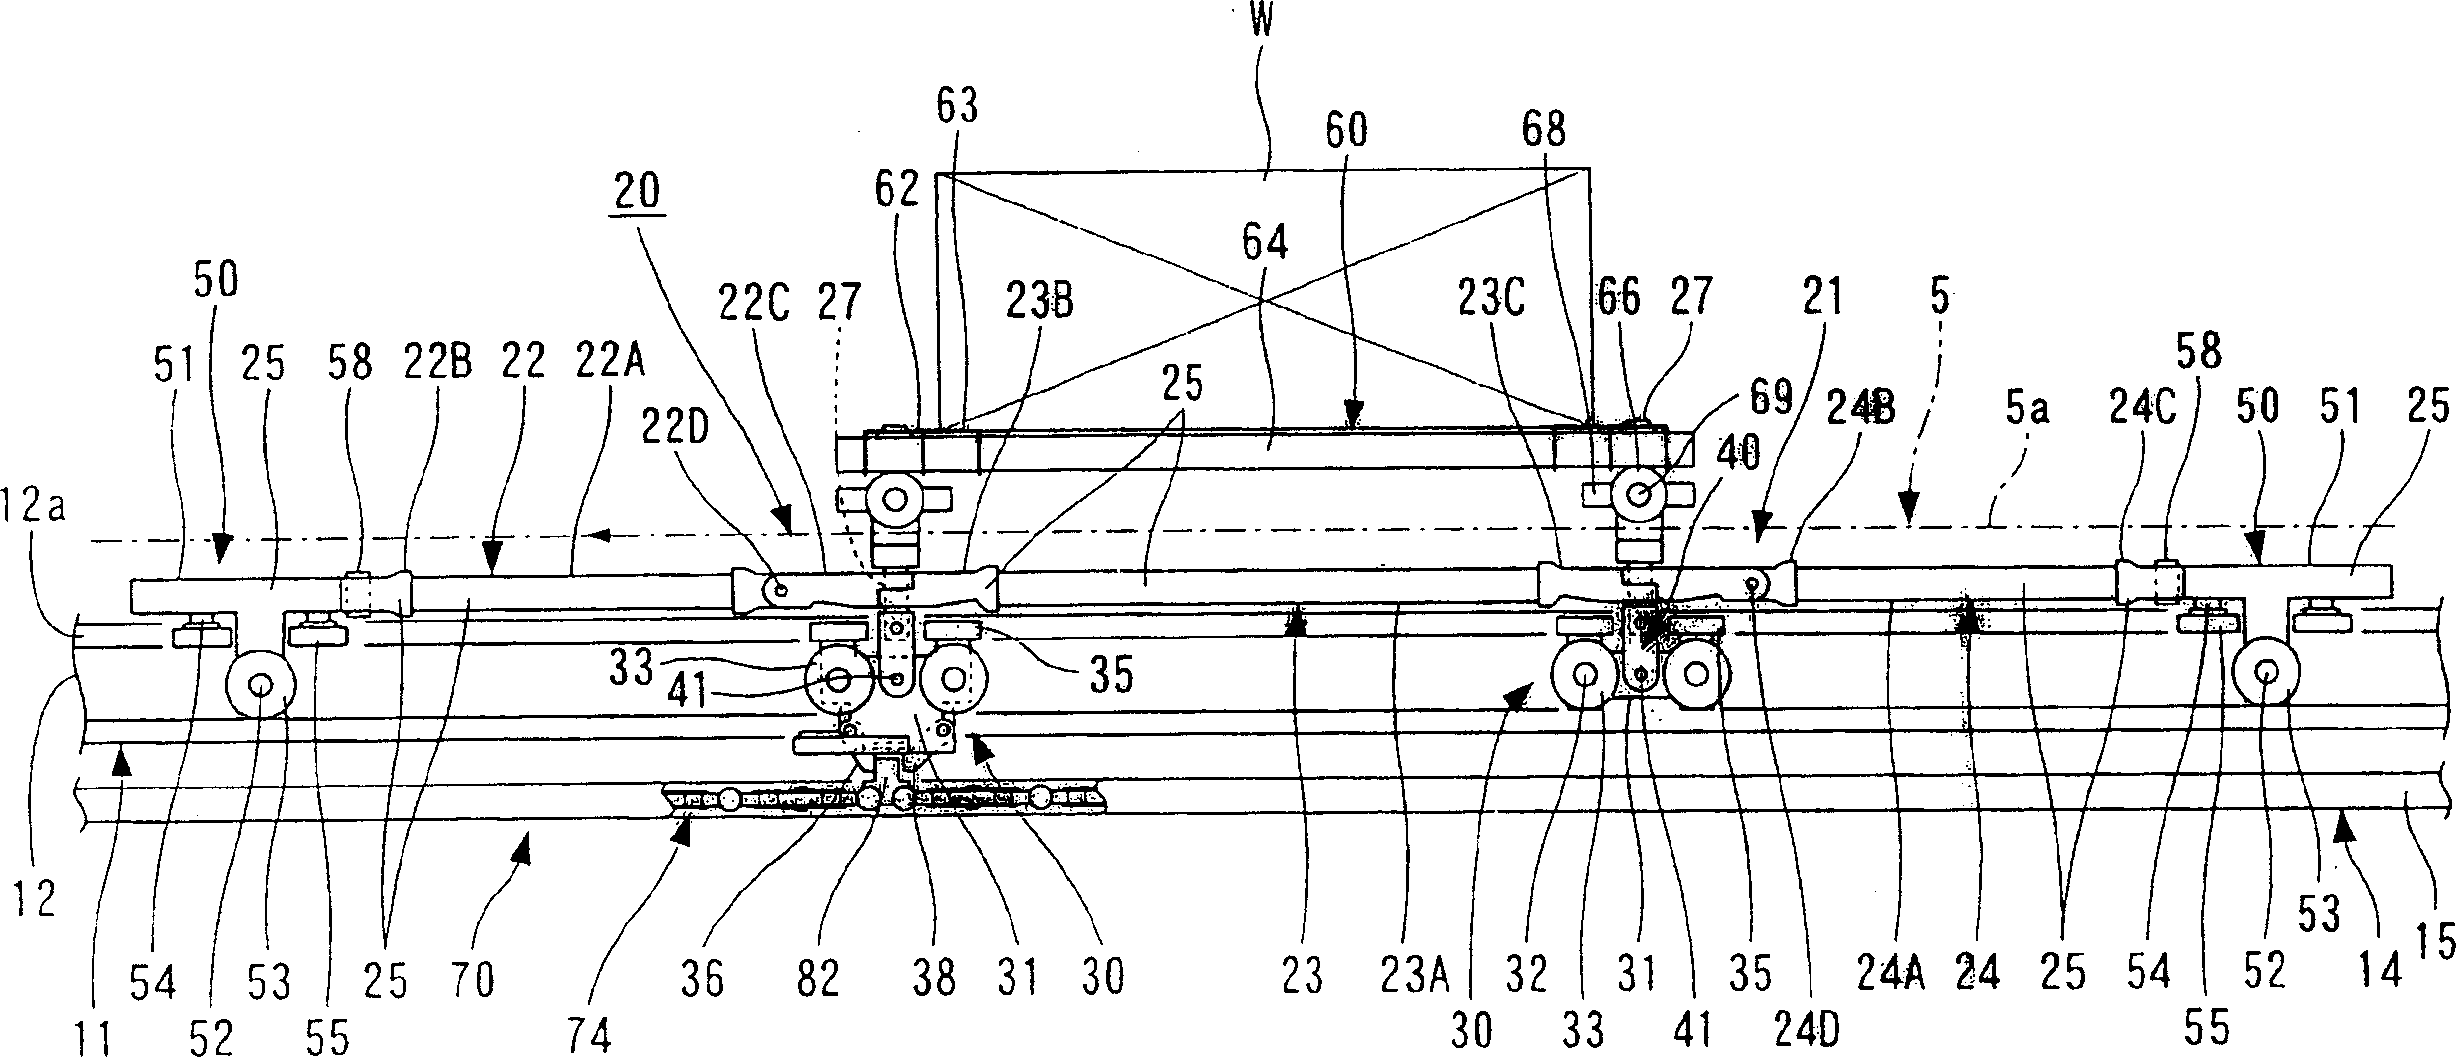 Conveyance apparatus using movable bodies